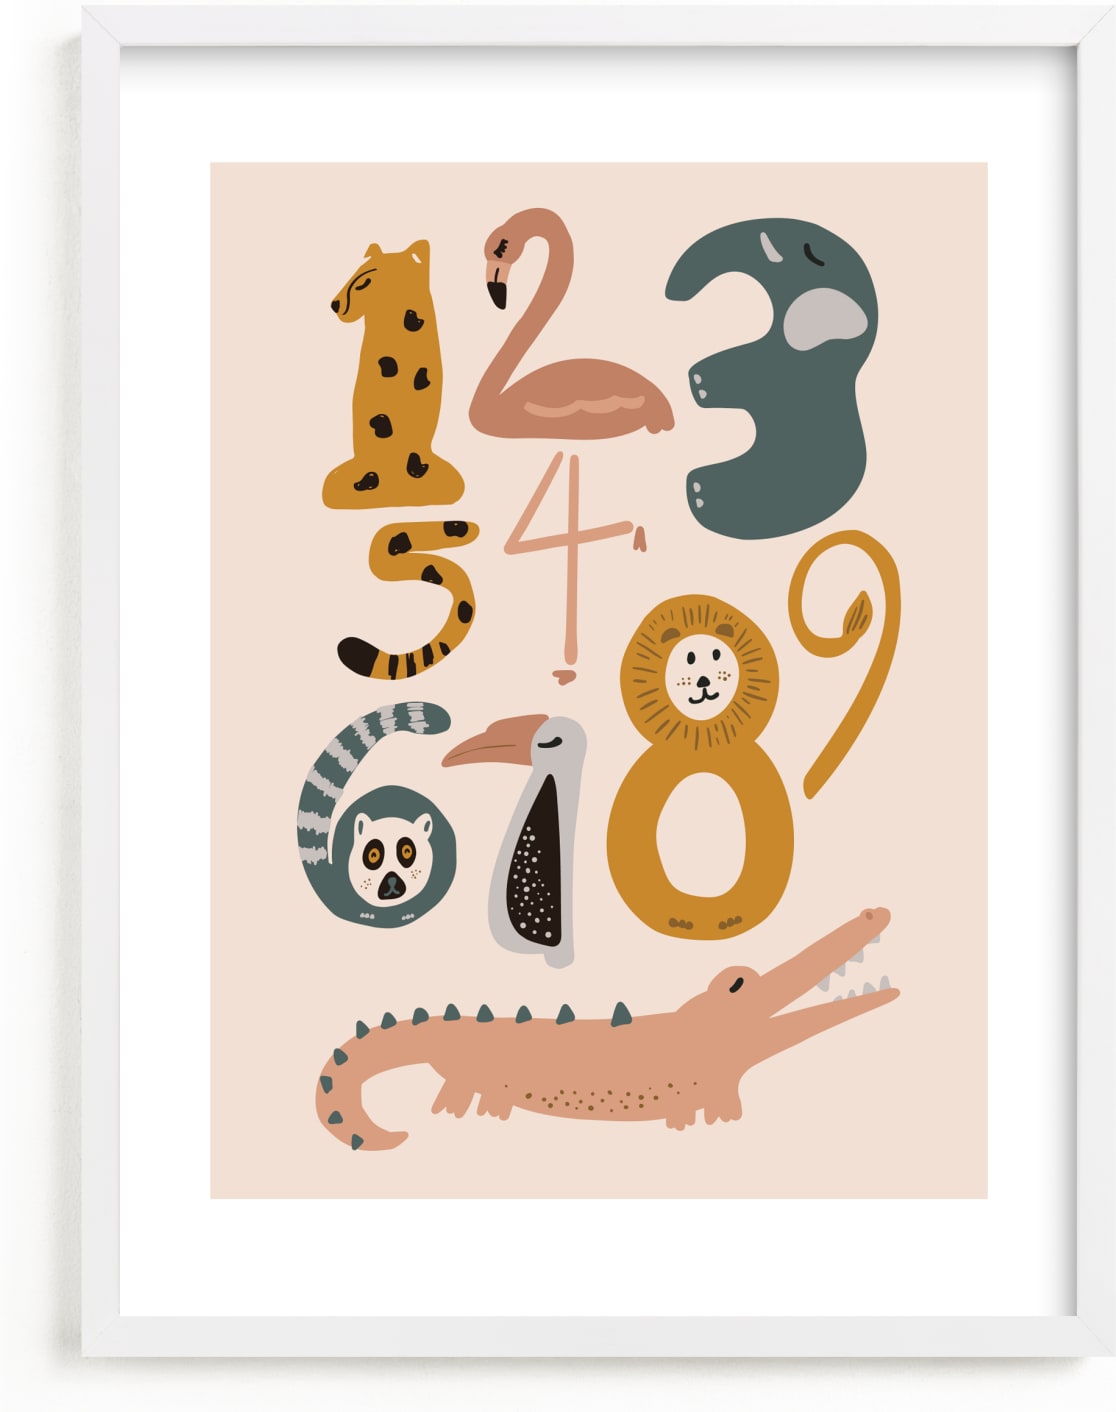 This is a colorful art by Jenna Holcomb called Safari Friends Numerals.